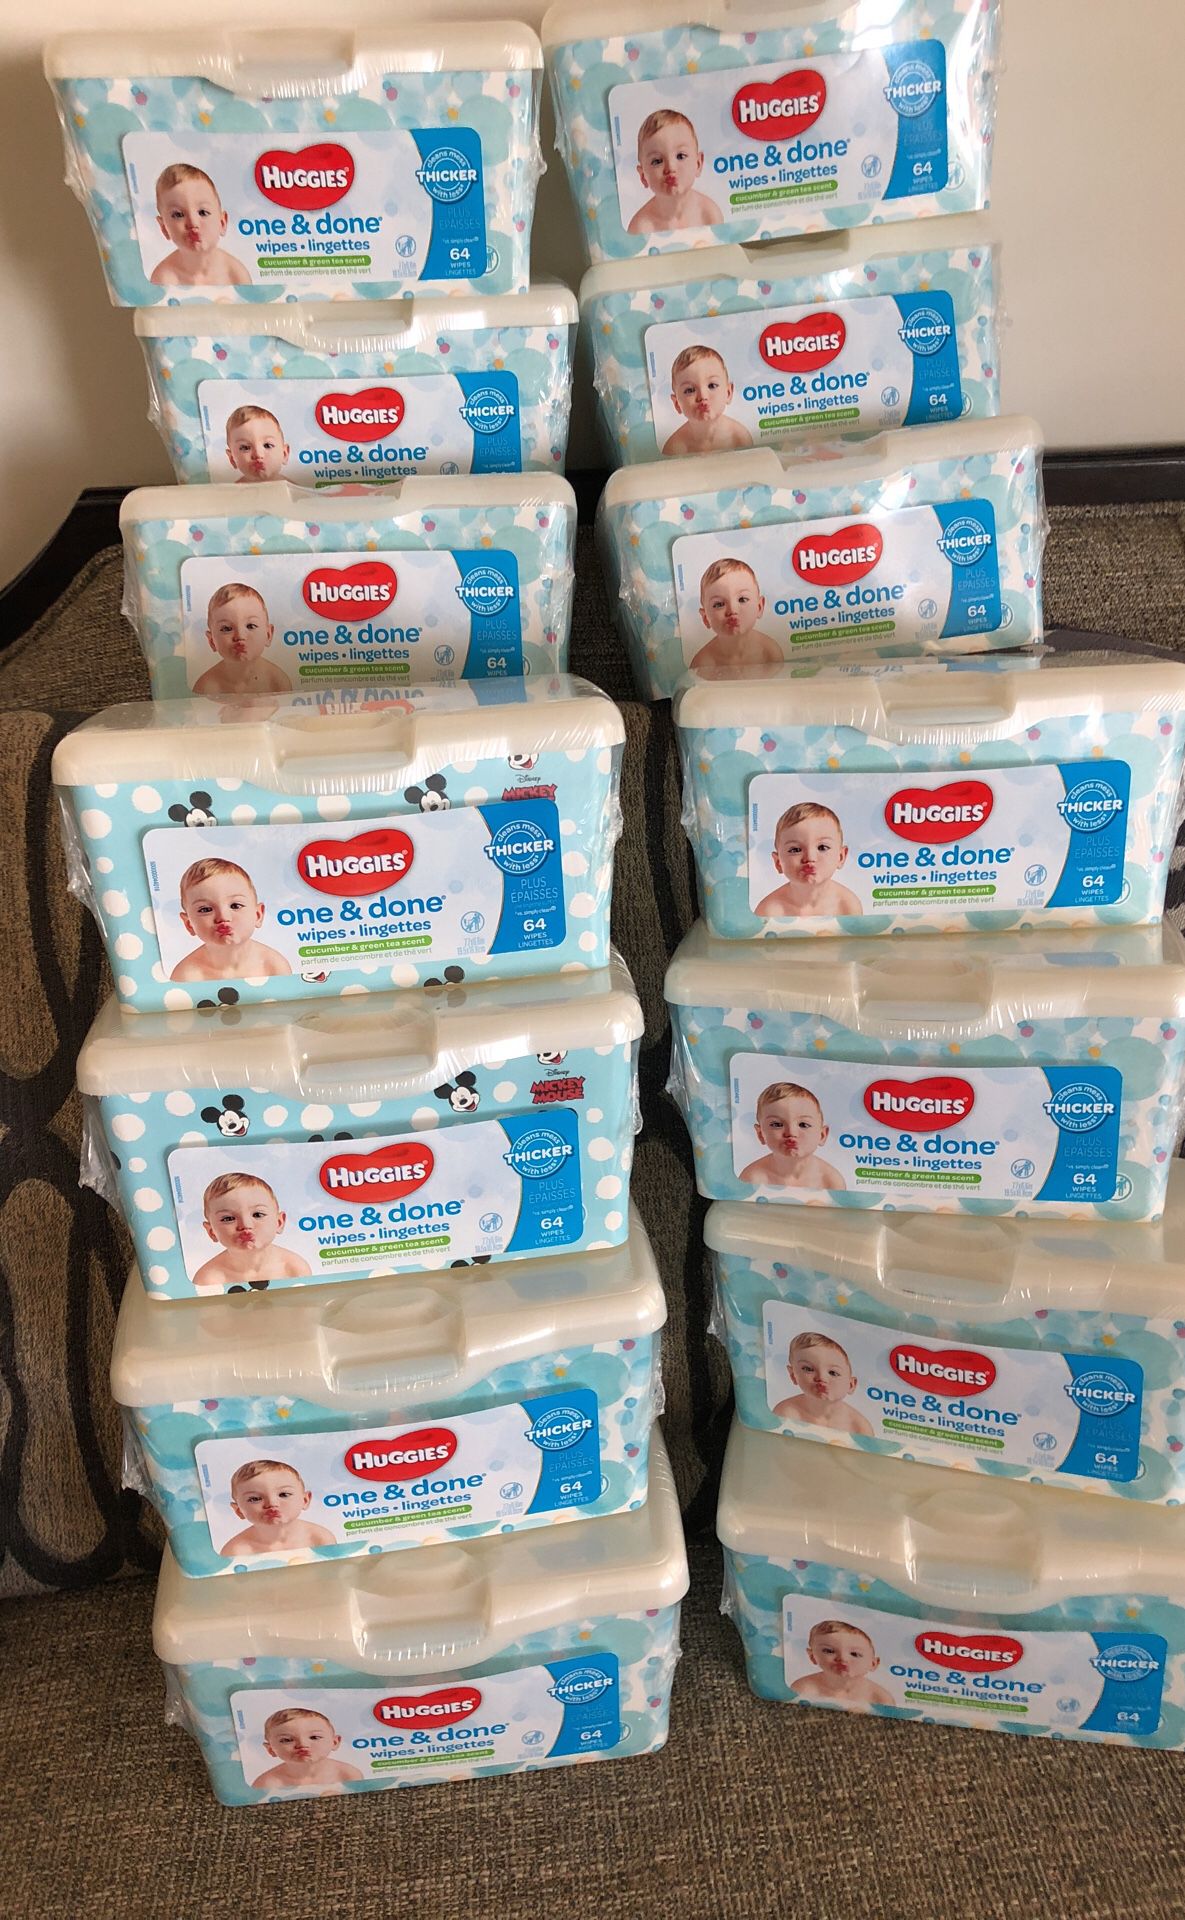 14 Packs of Huggies Wipes. Please see all the pictures and read the description